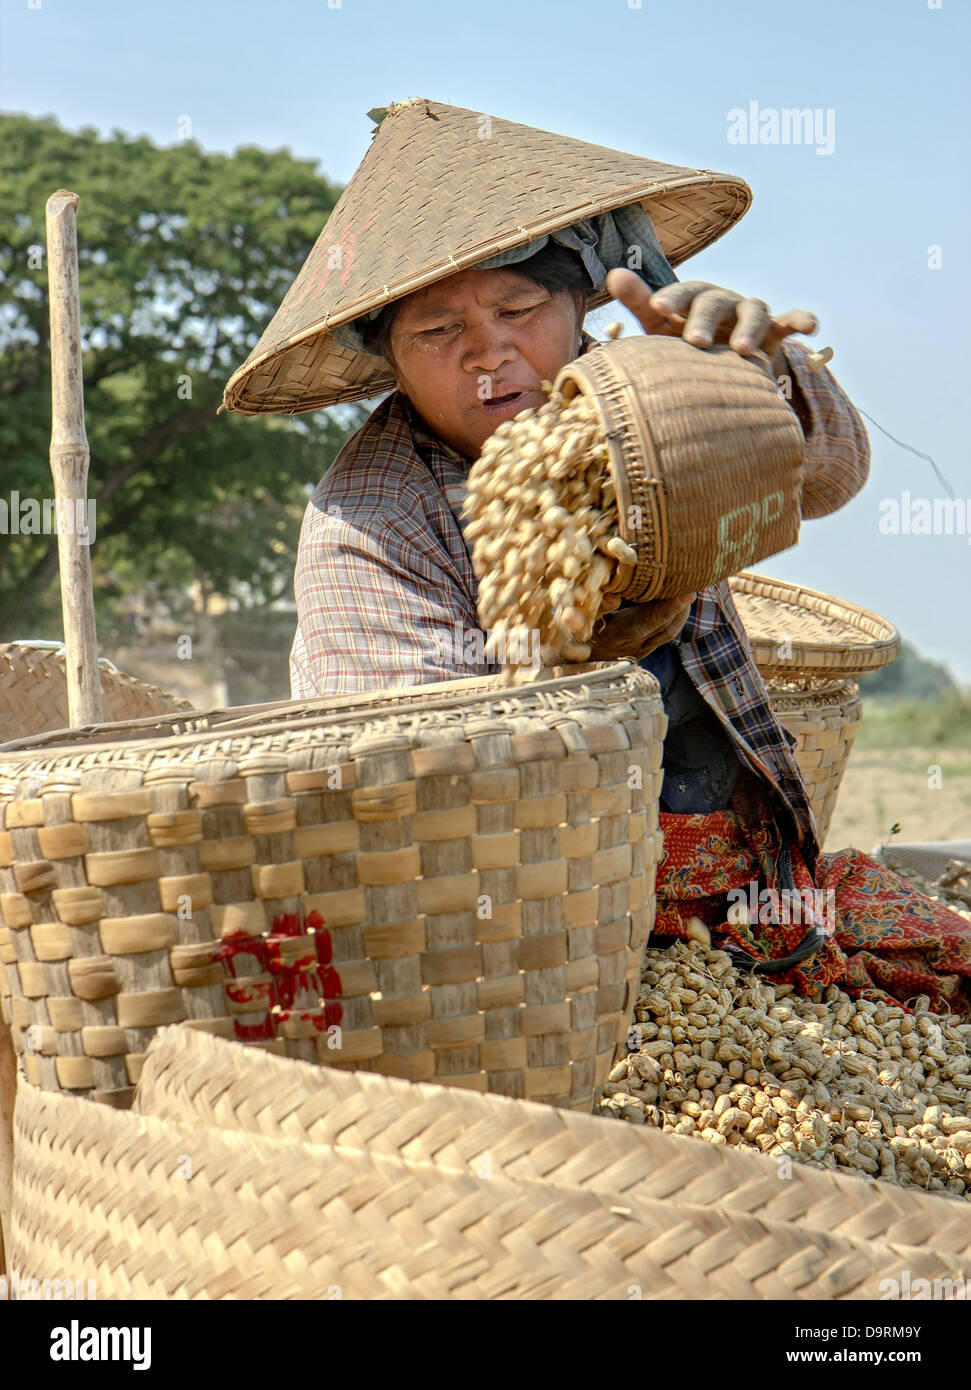 Woman pouring nuts in the basket Stock Photo